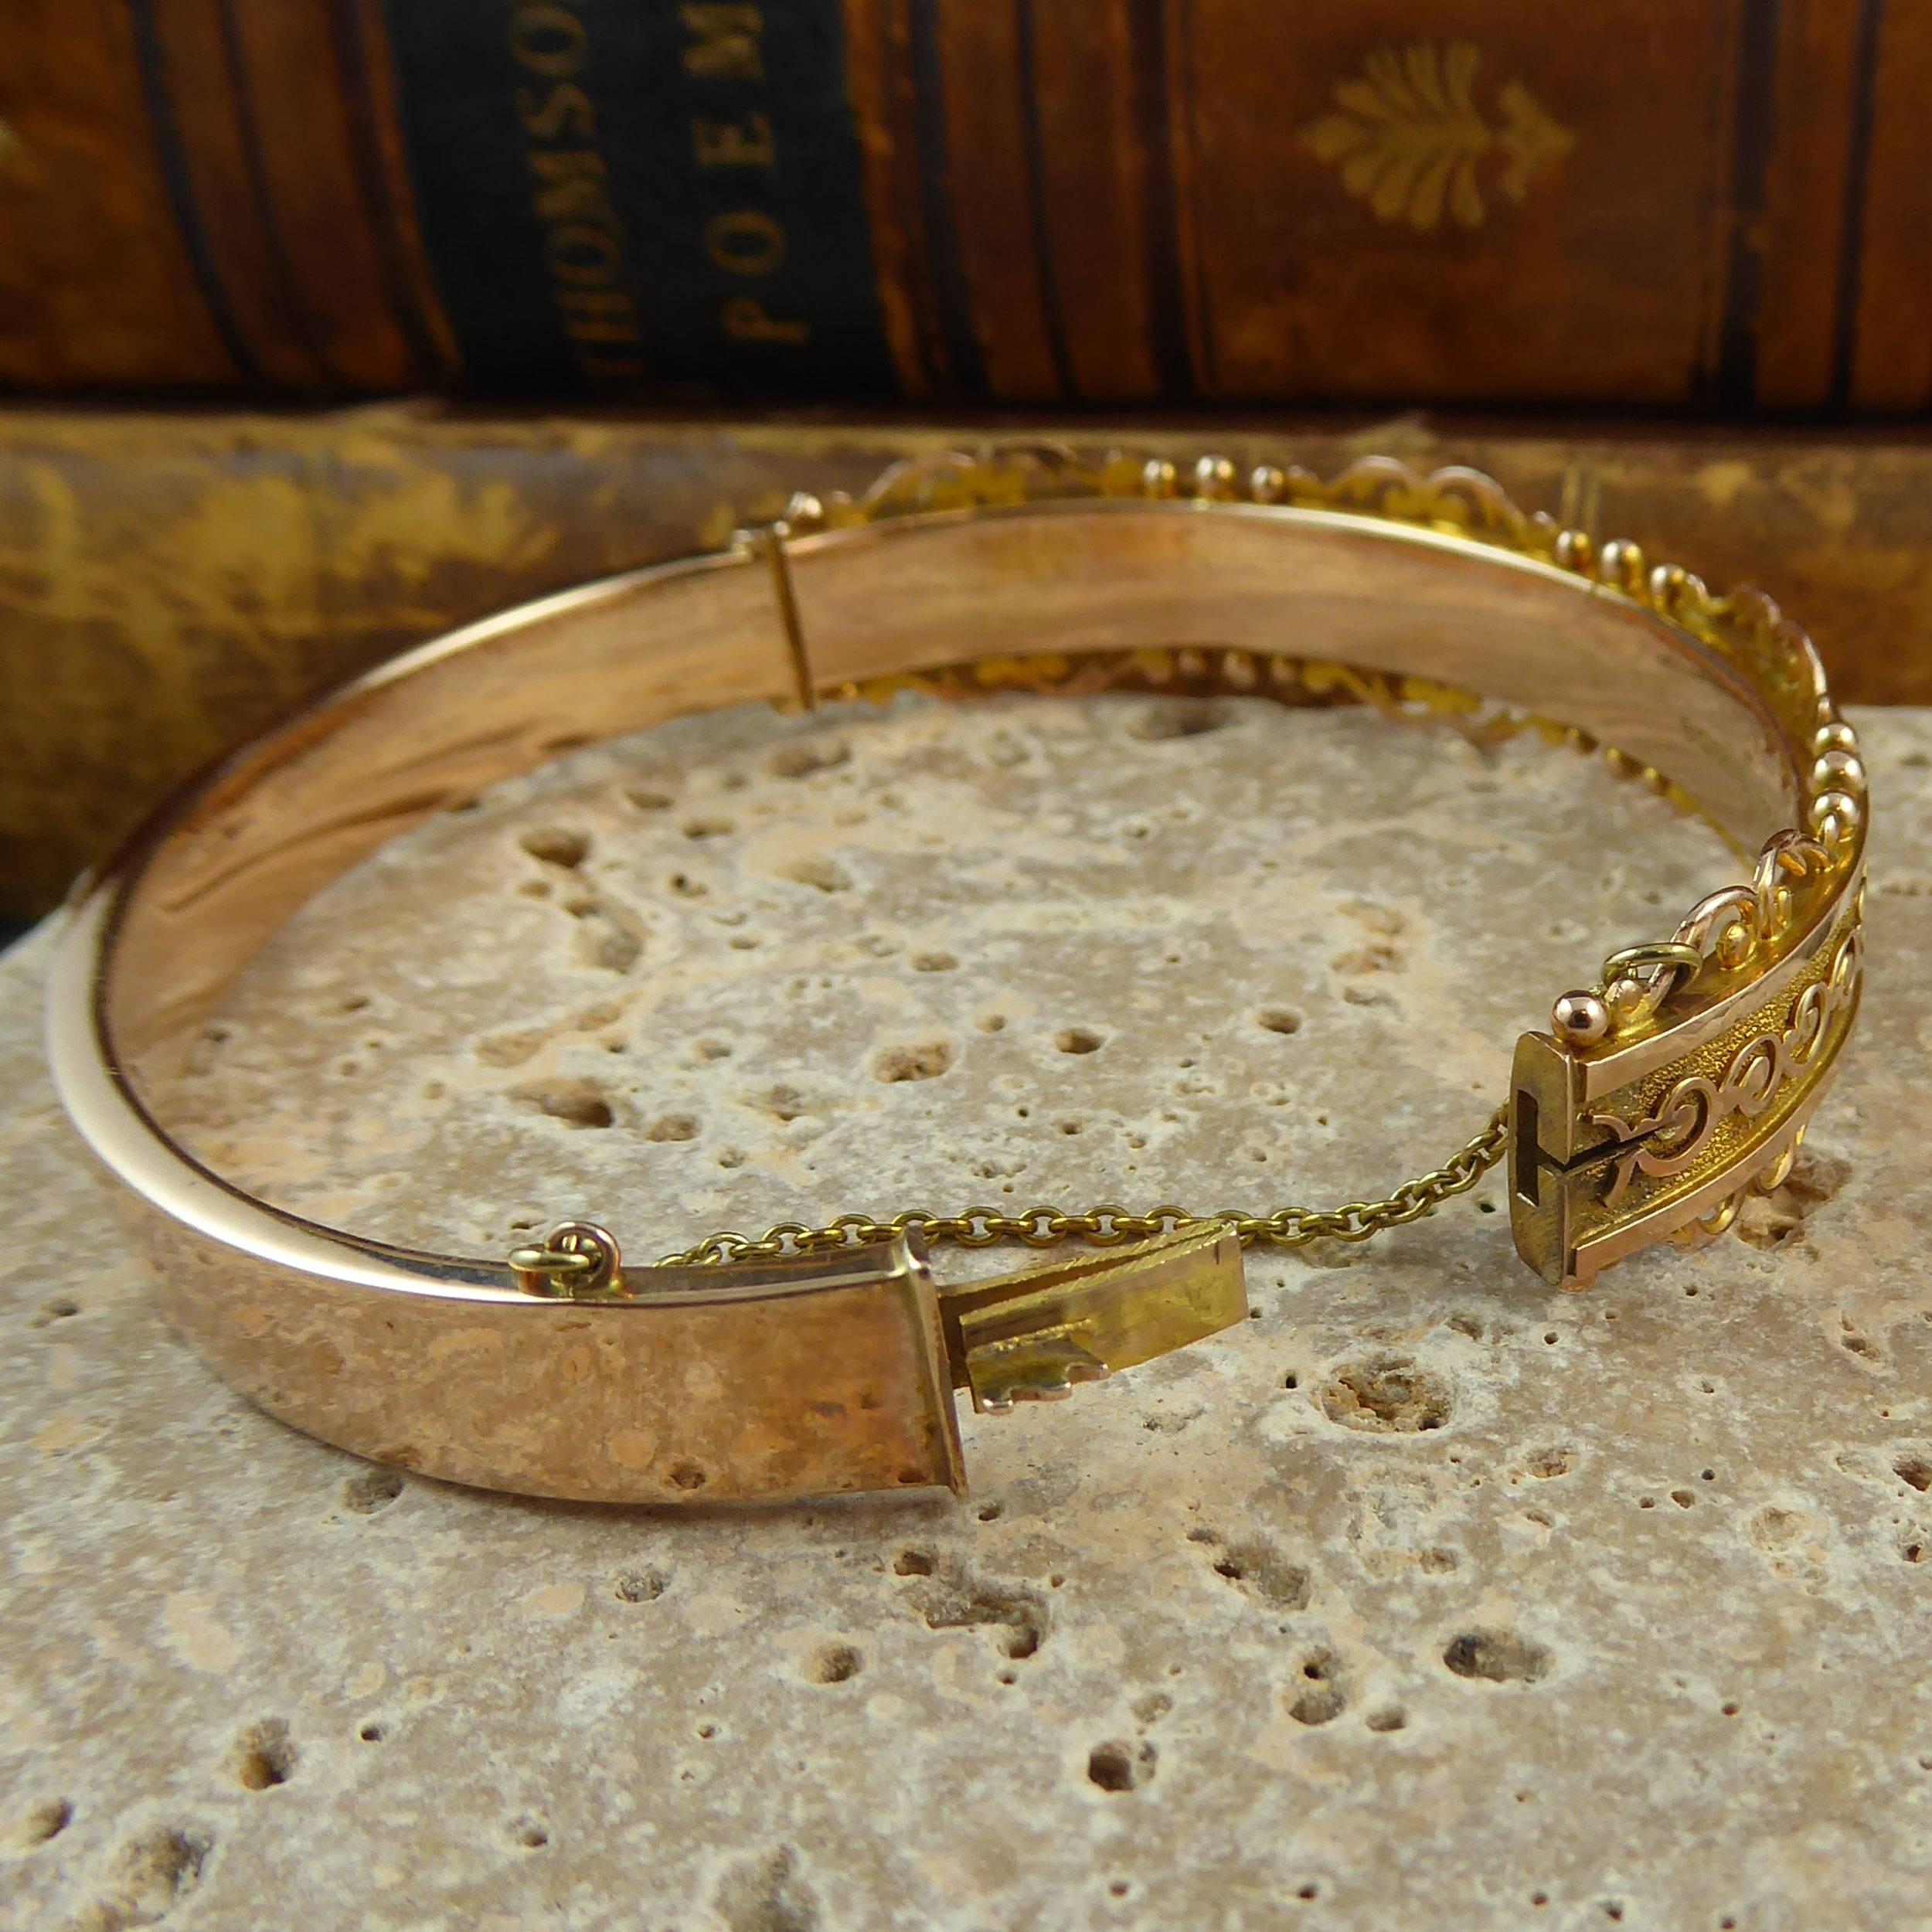 Antique Gold Hallmarked 1913 Bangle Bracelet In Good Condition In Yorkshire, West Yorkshire